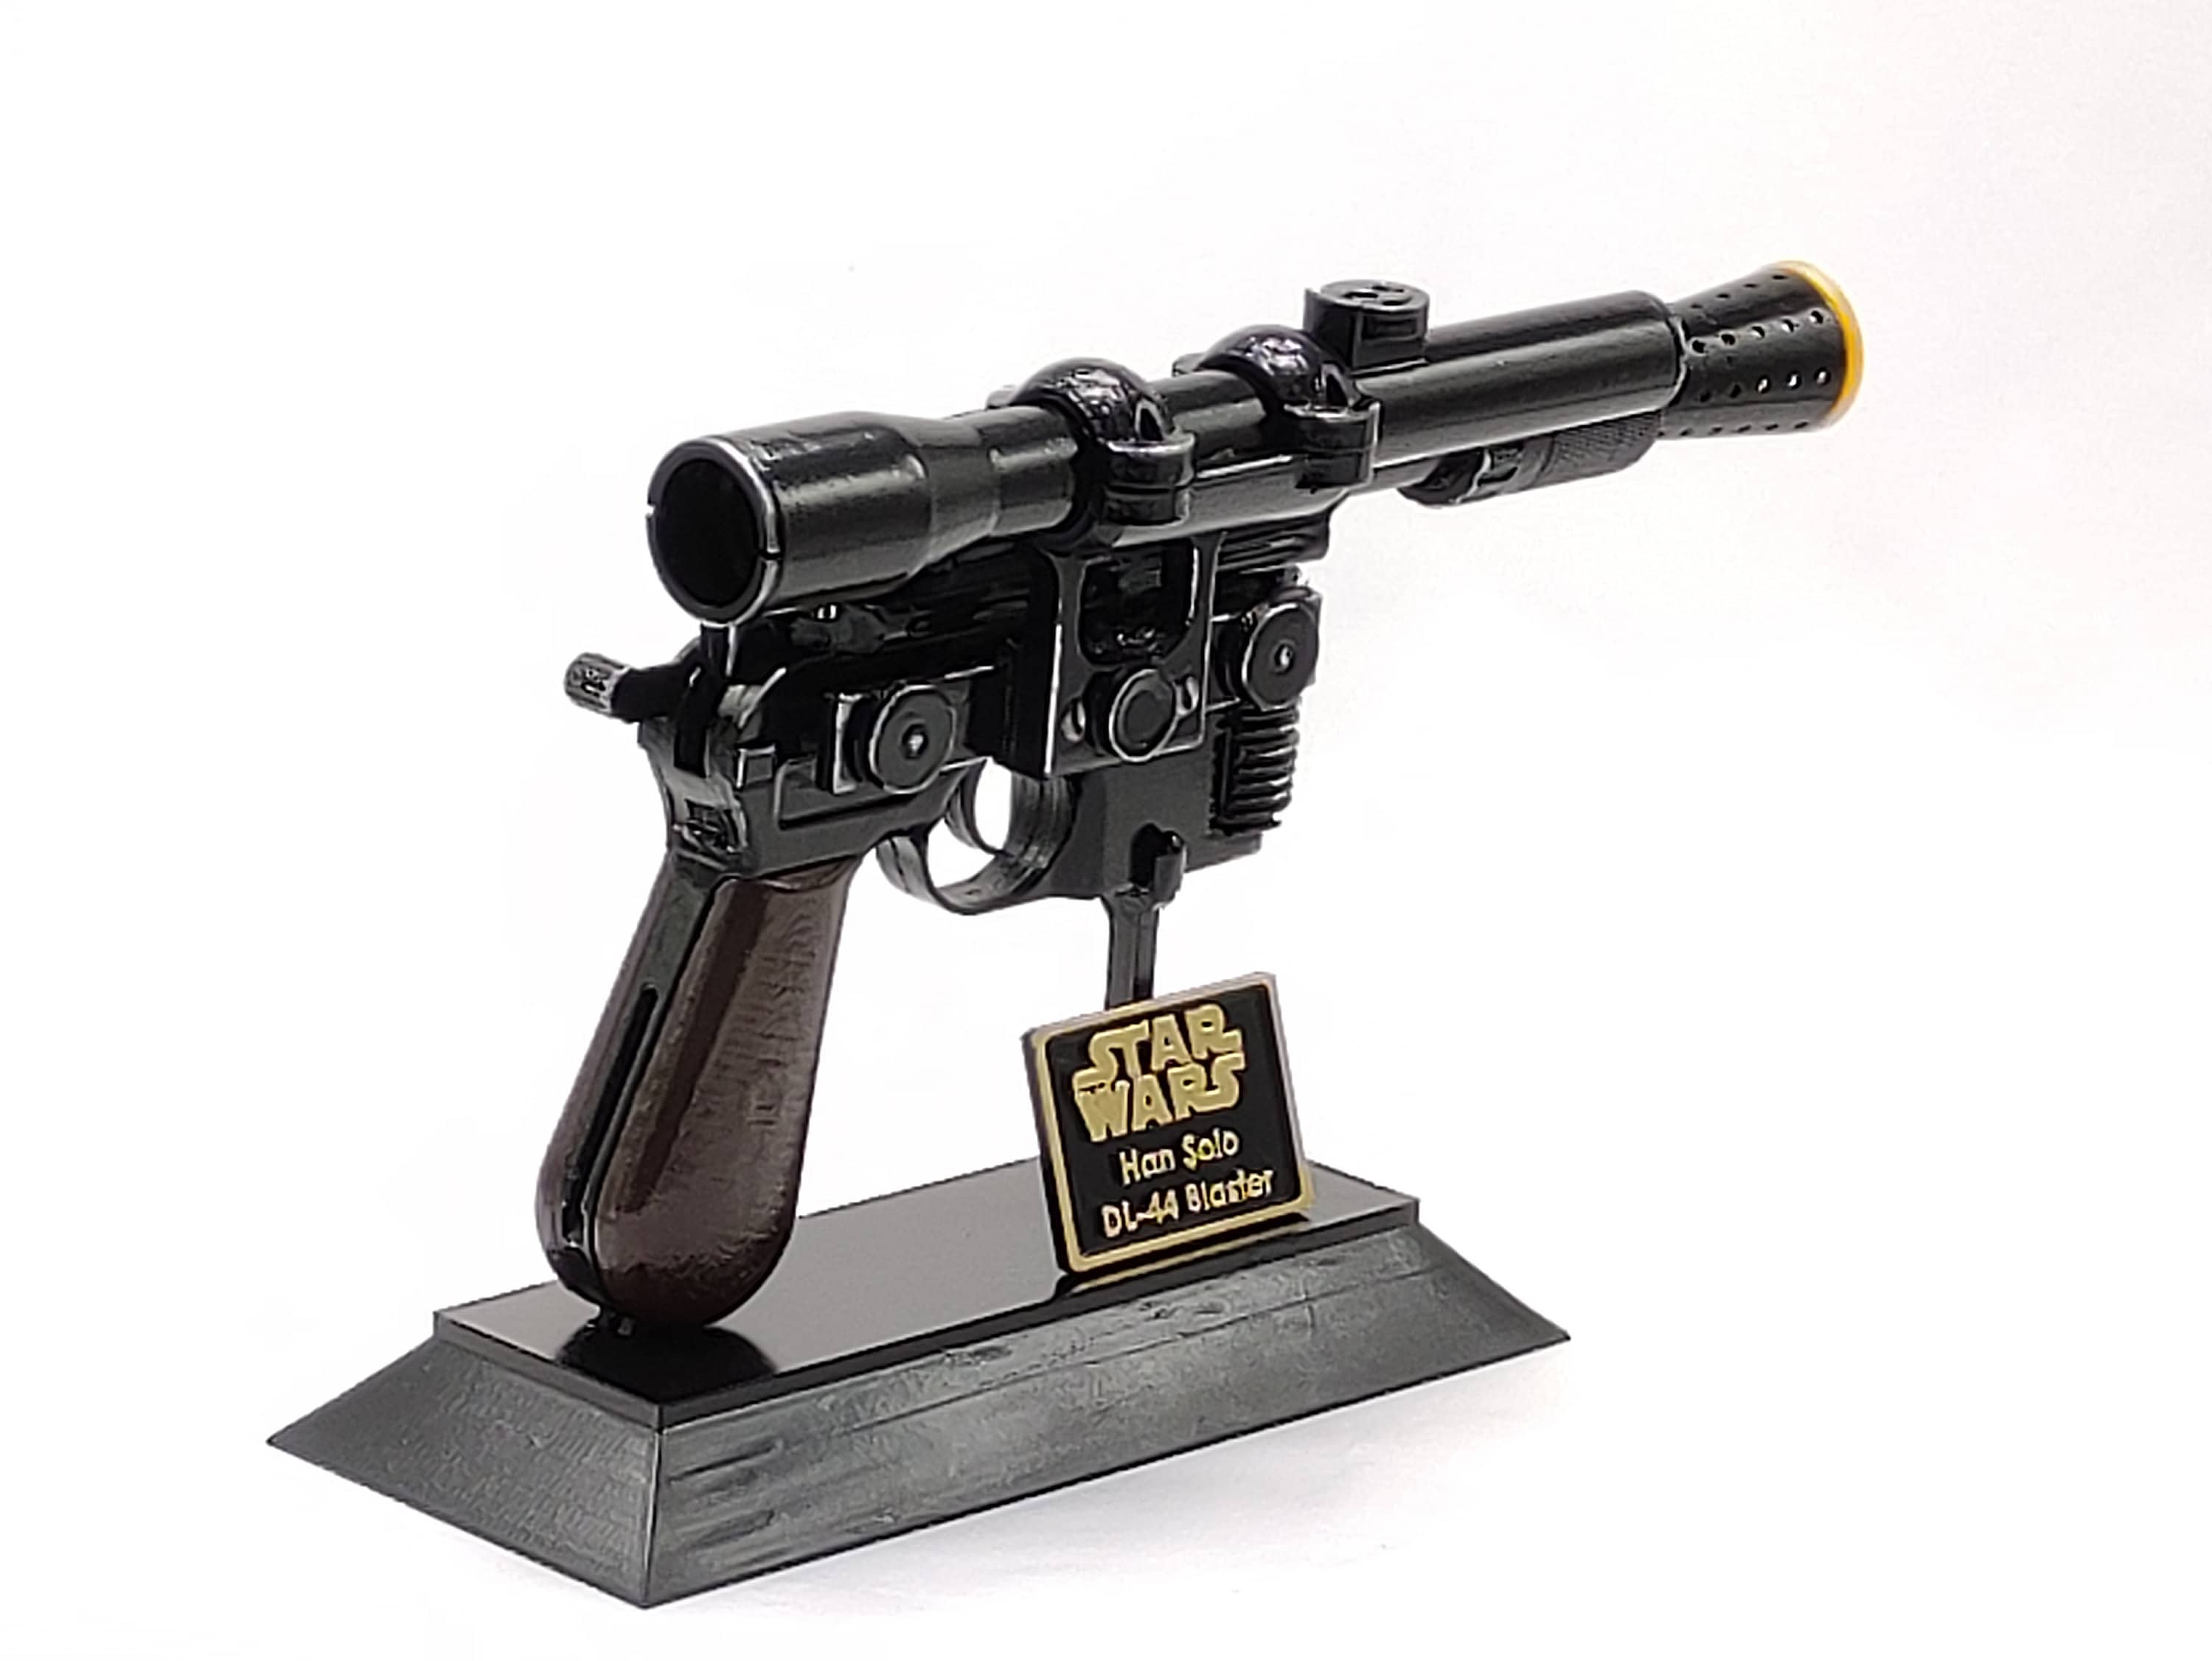 Han Solo Blaster the Force Awakens Star Wars DL-44 Replica Movie Prop Free  Stand Free Shipping With Tracking -  Israel